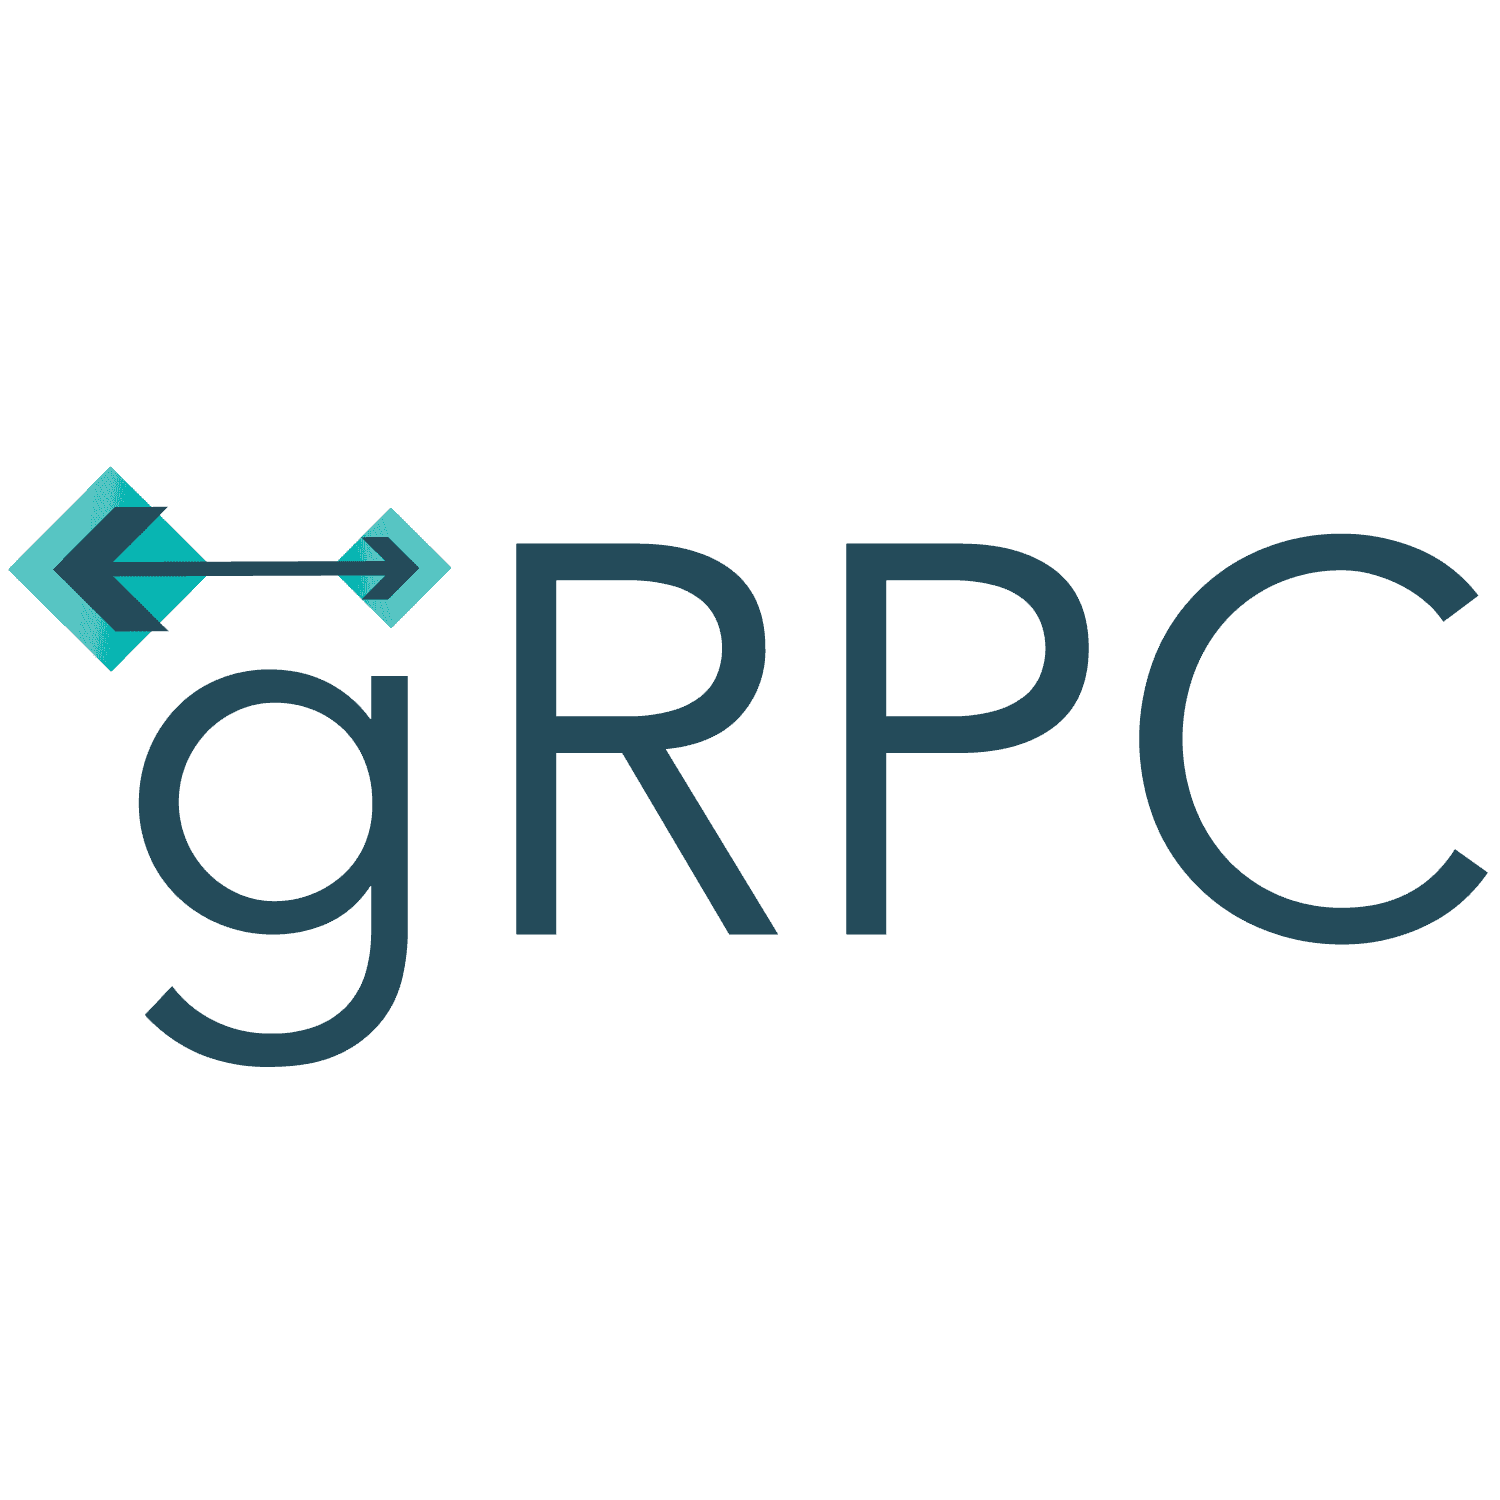 grpc-icon-color.png